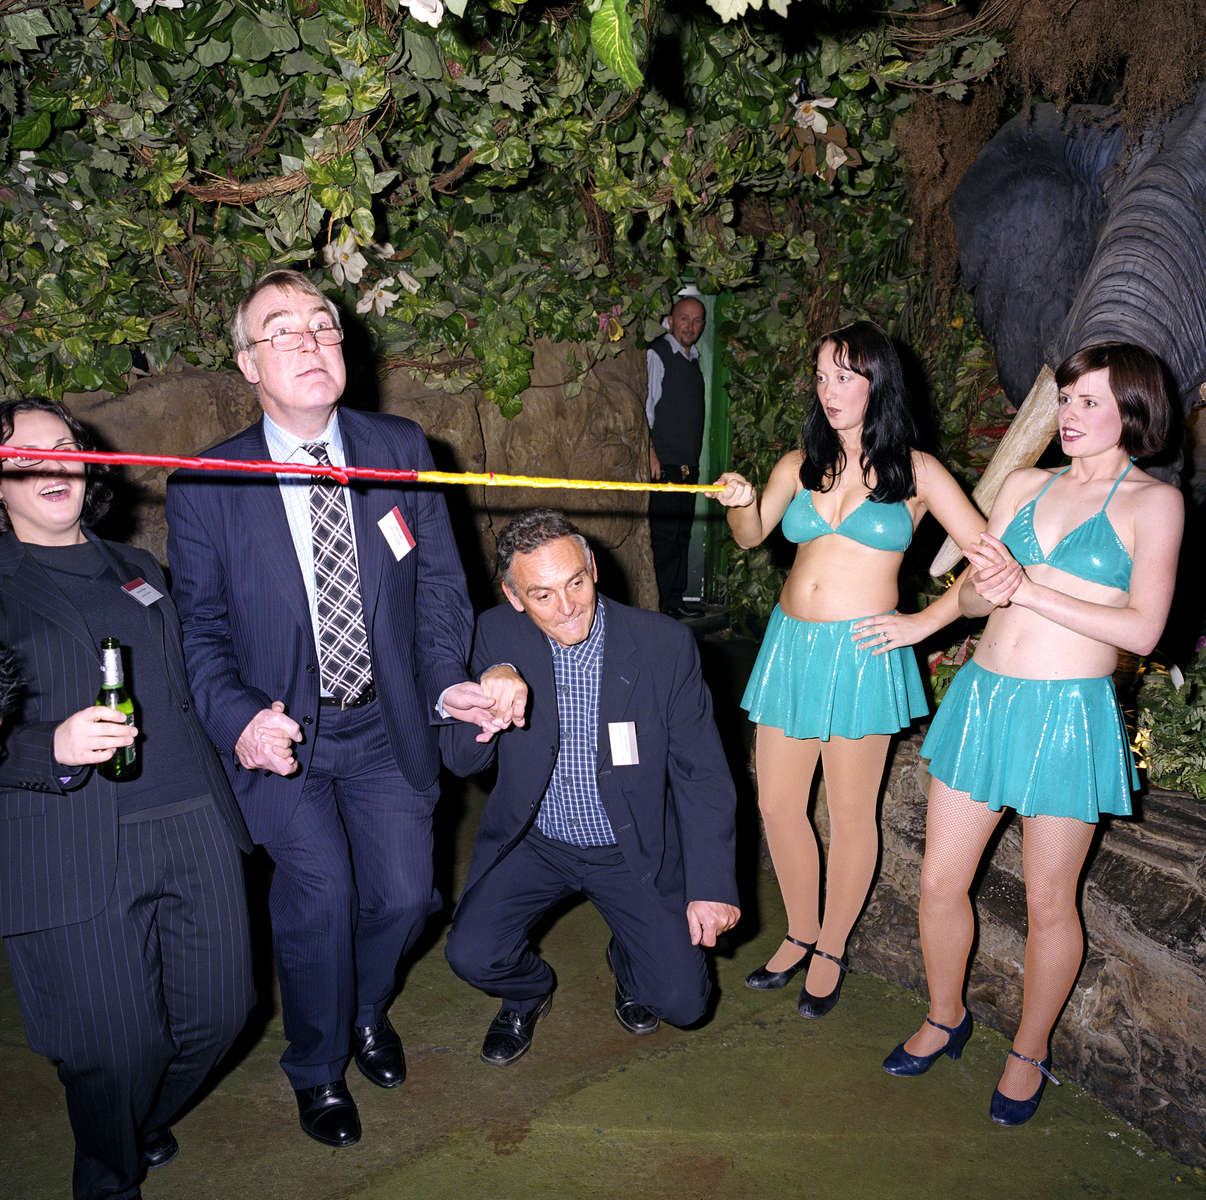 Staff and clients of Lawrence Graham, a firm of solicitors, join limbo dancers at the Rainforest Café, London. November 2002